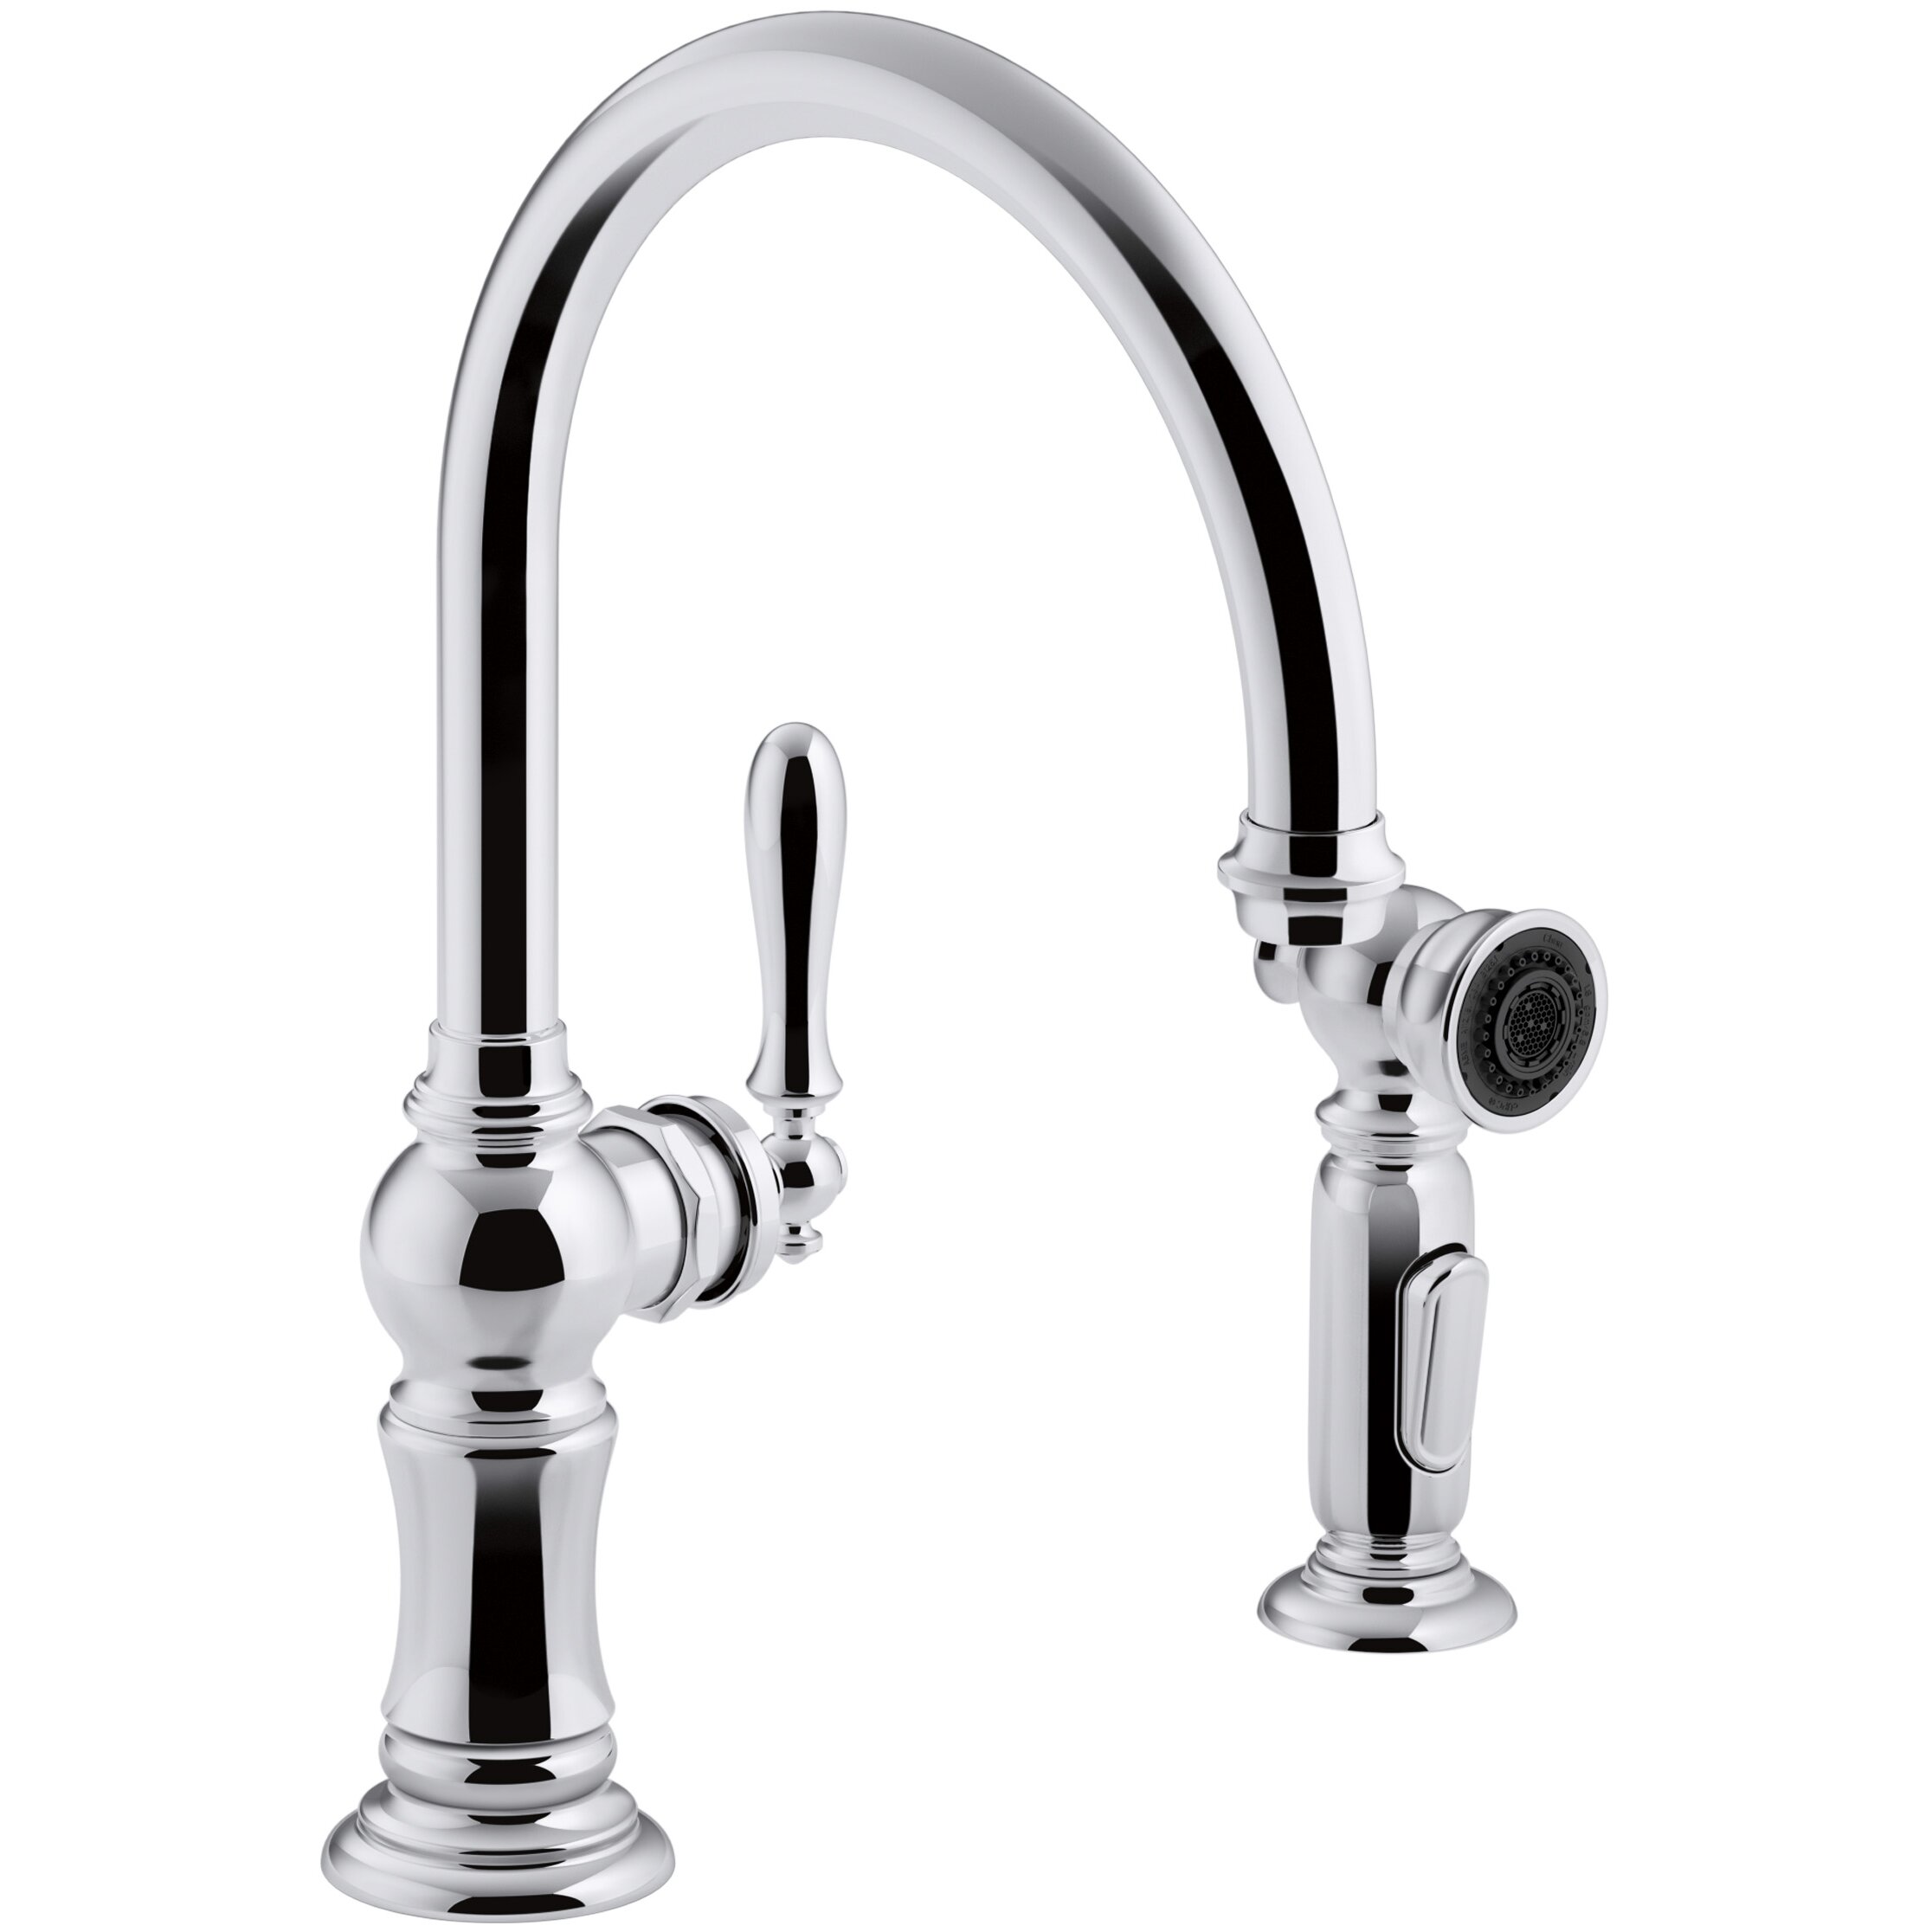 Kohler Artifacts 2 Hole Kitchen Sink Faucet with Swing